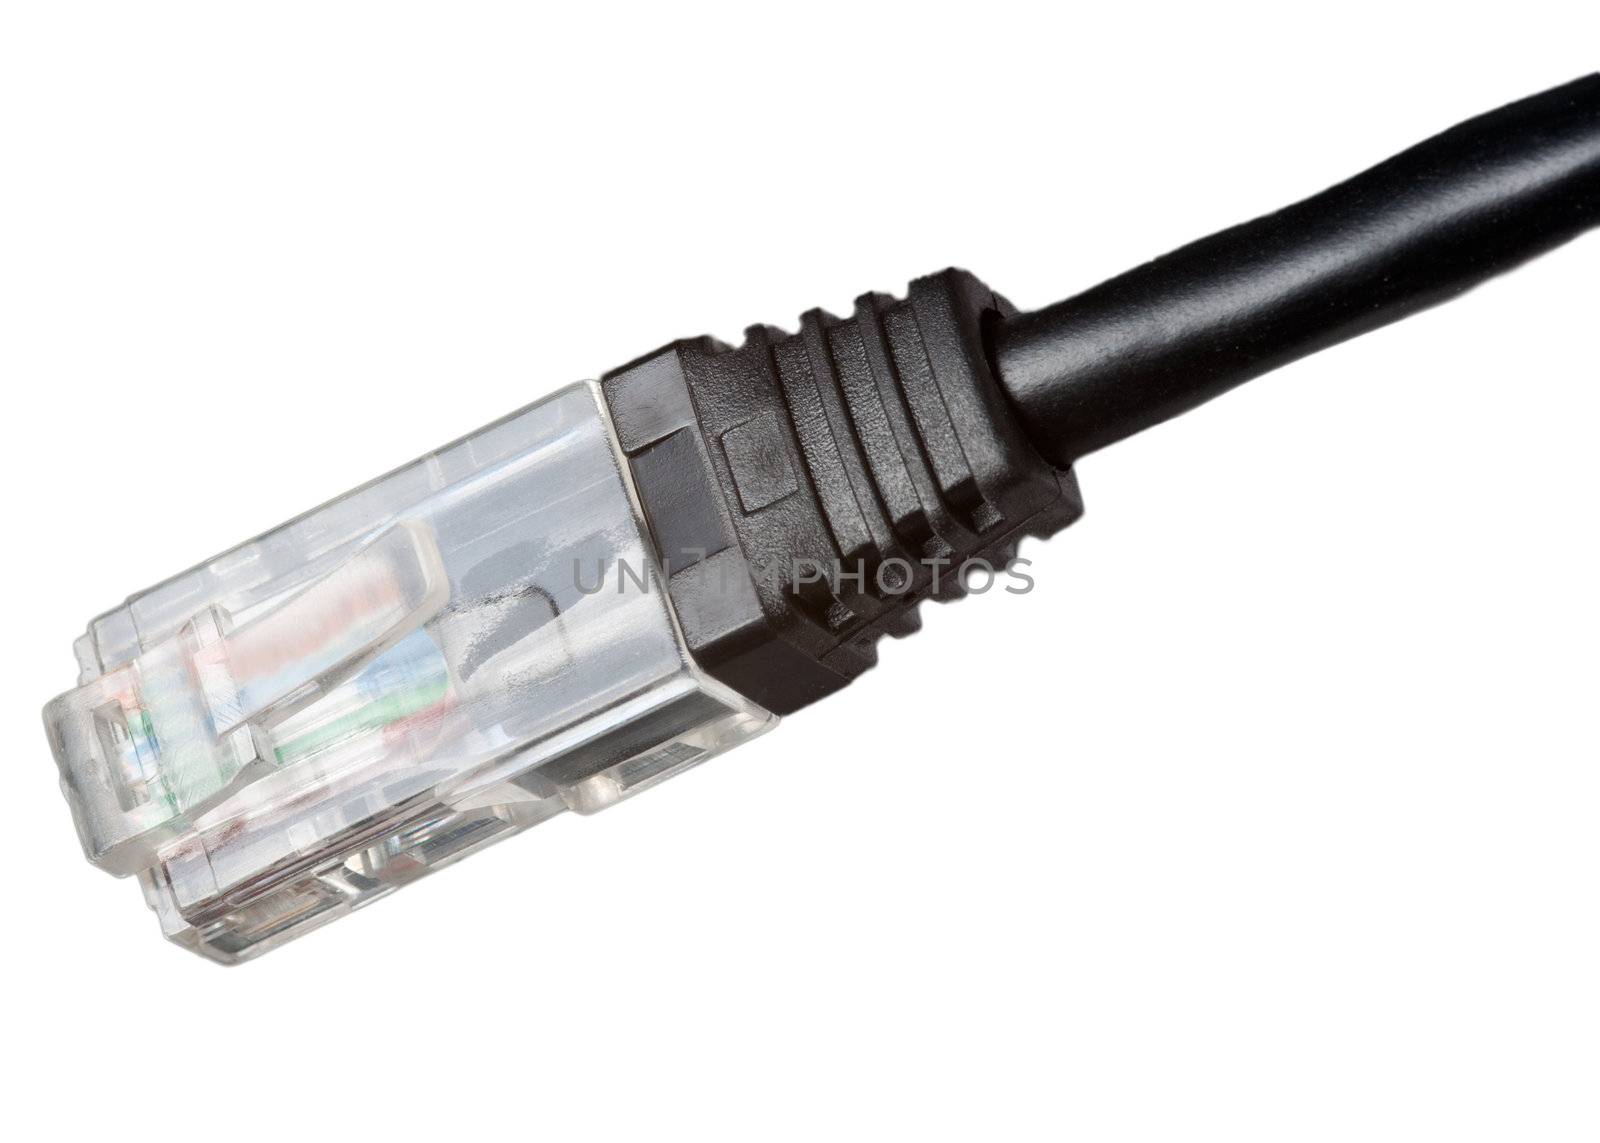 Cable with RJ-45 connector by ruigsantos